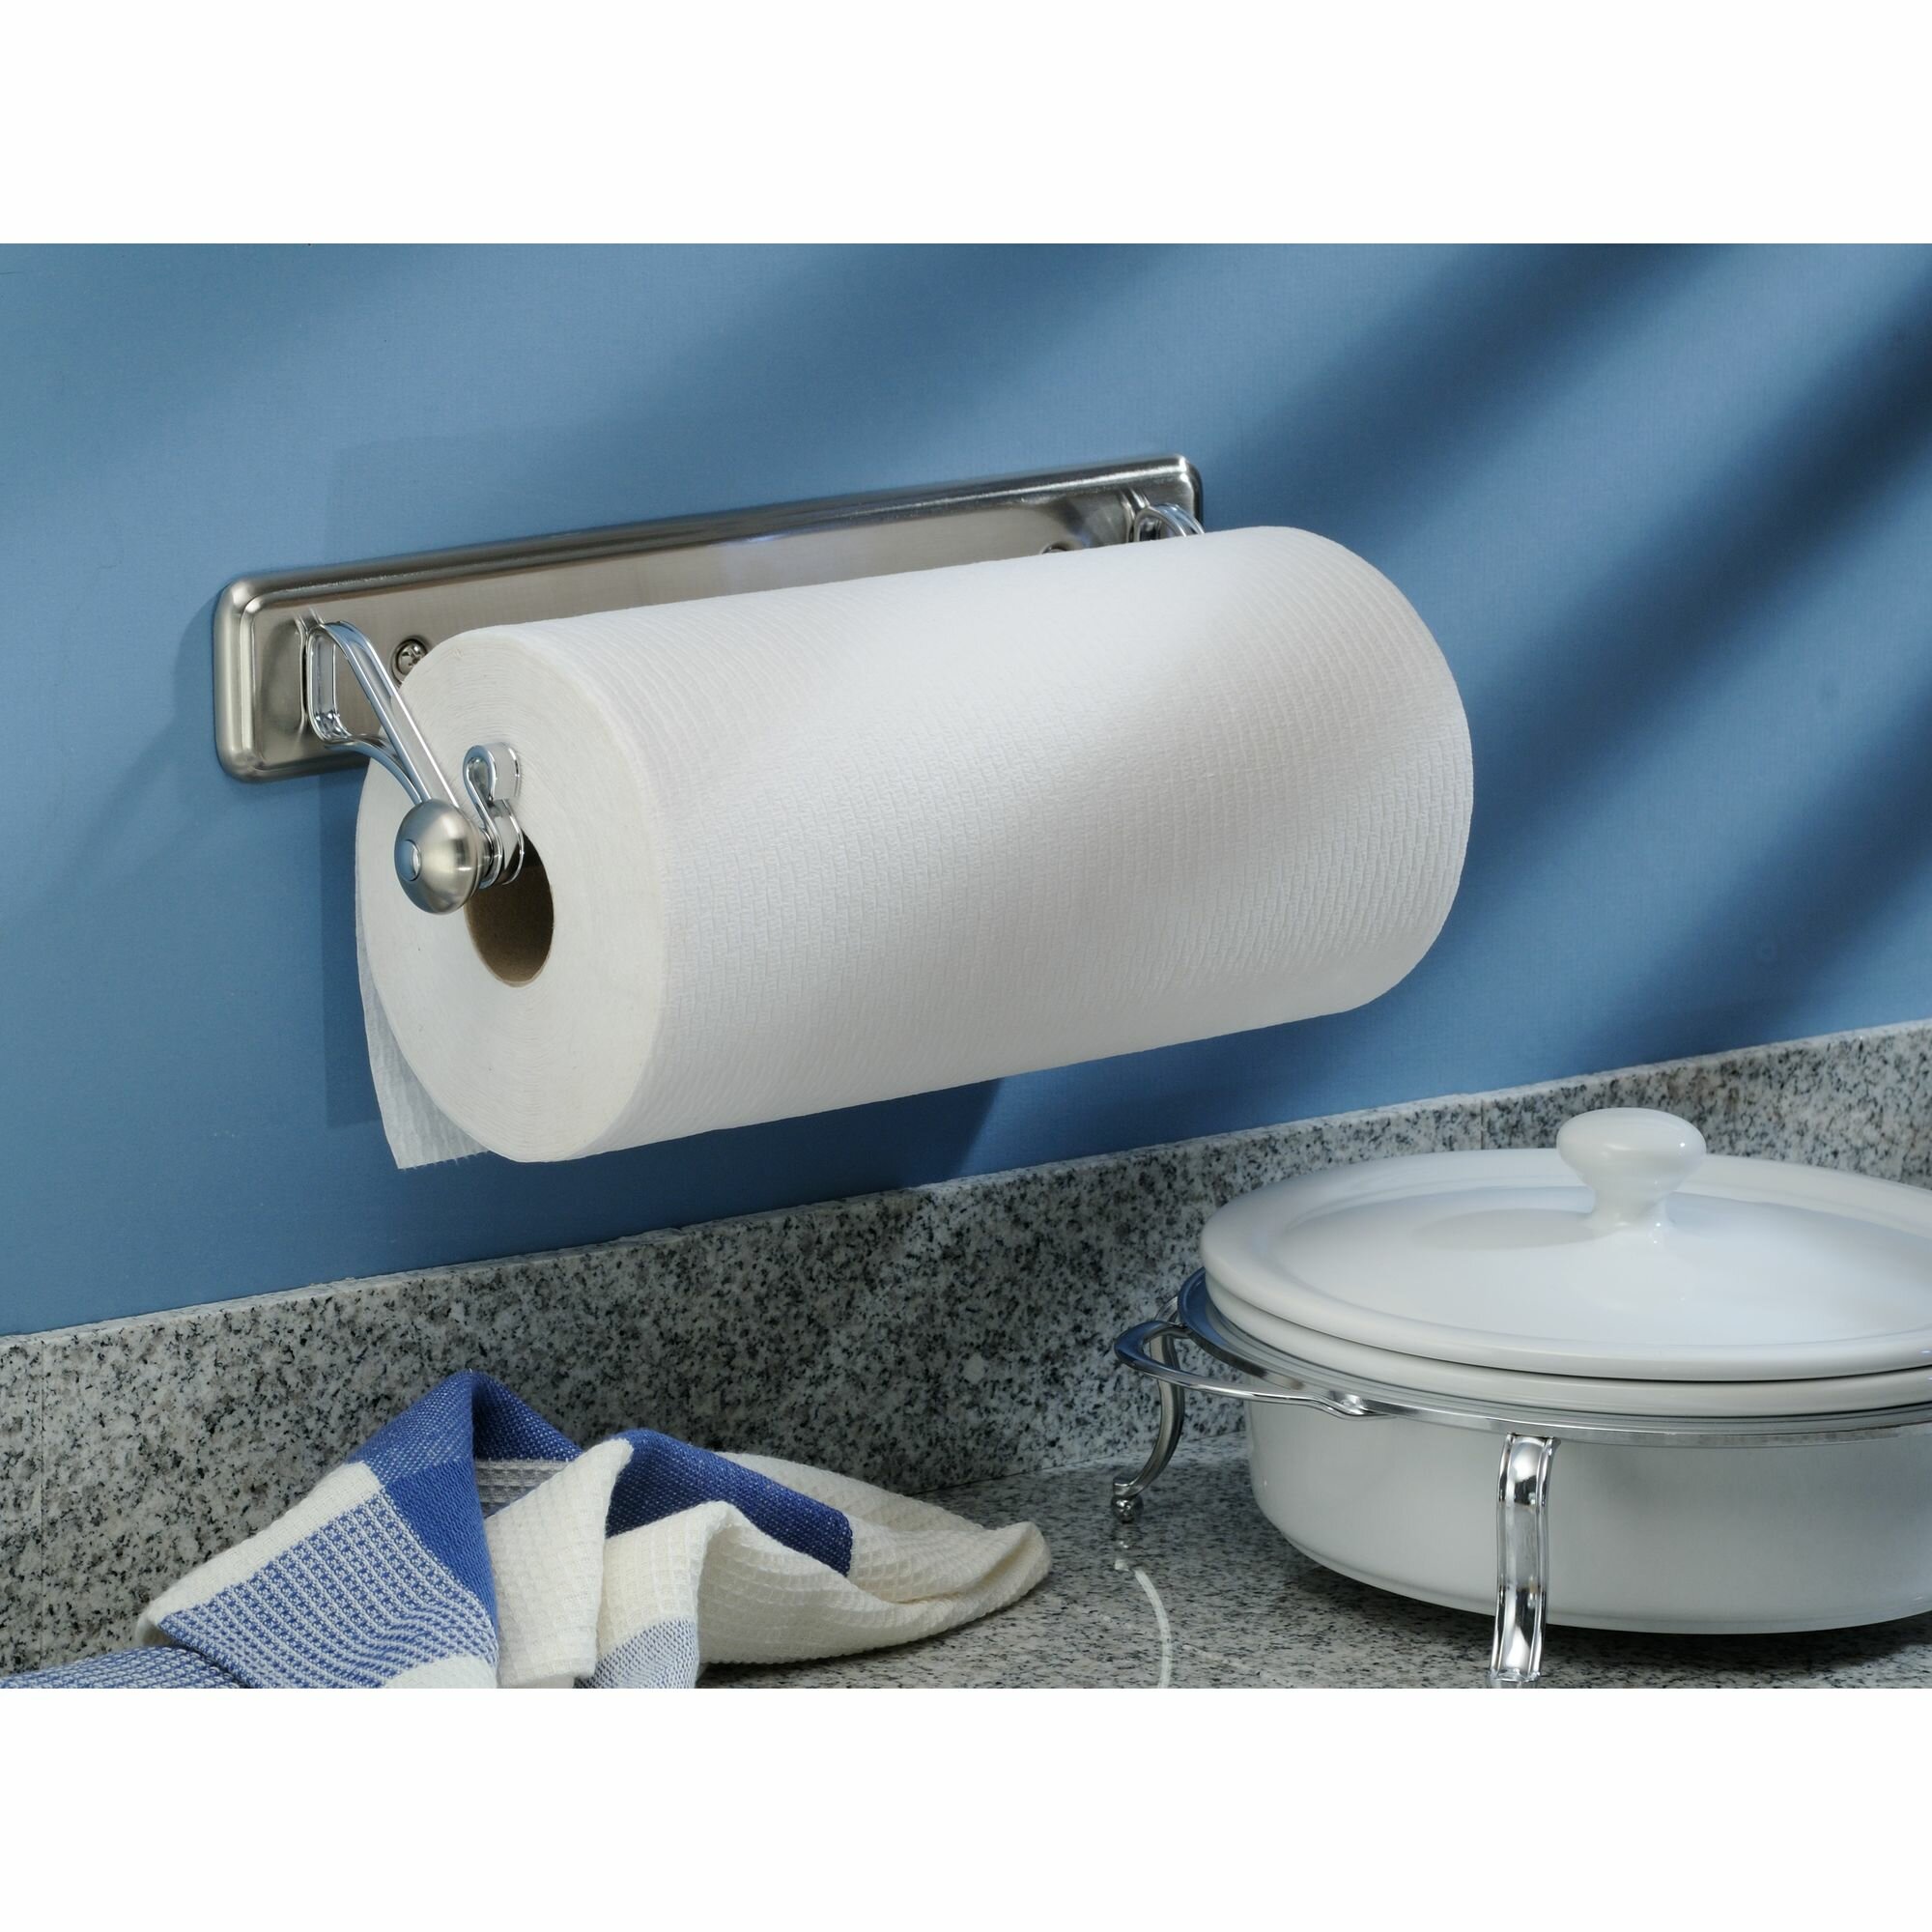 Stream  Modern Wall-Mounted Paper Towel Holder by Umbra